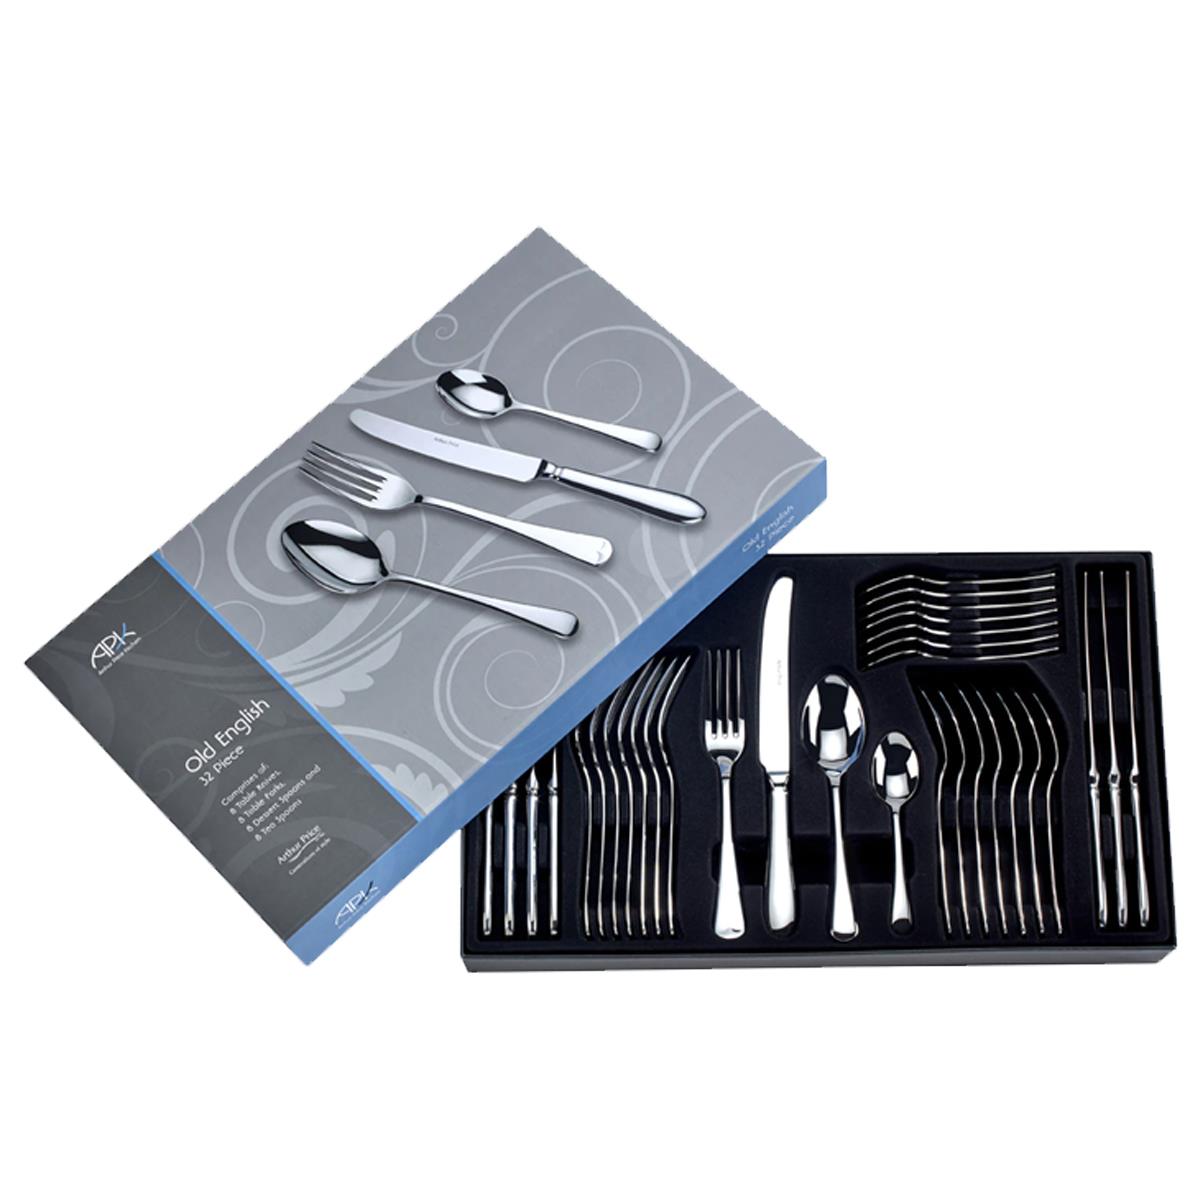 Will you match a lower online price for the Arthur Price Old English Cutlery Set?